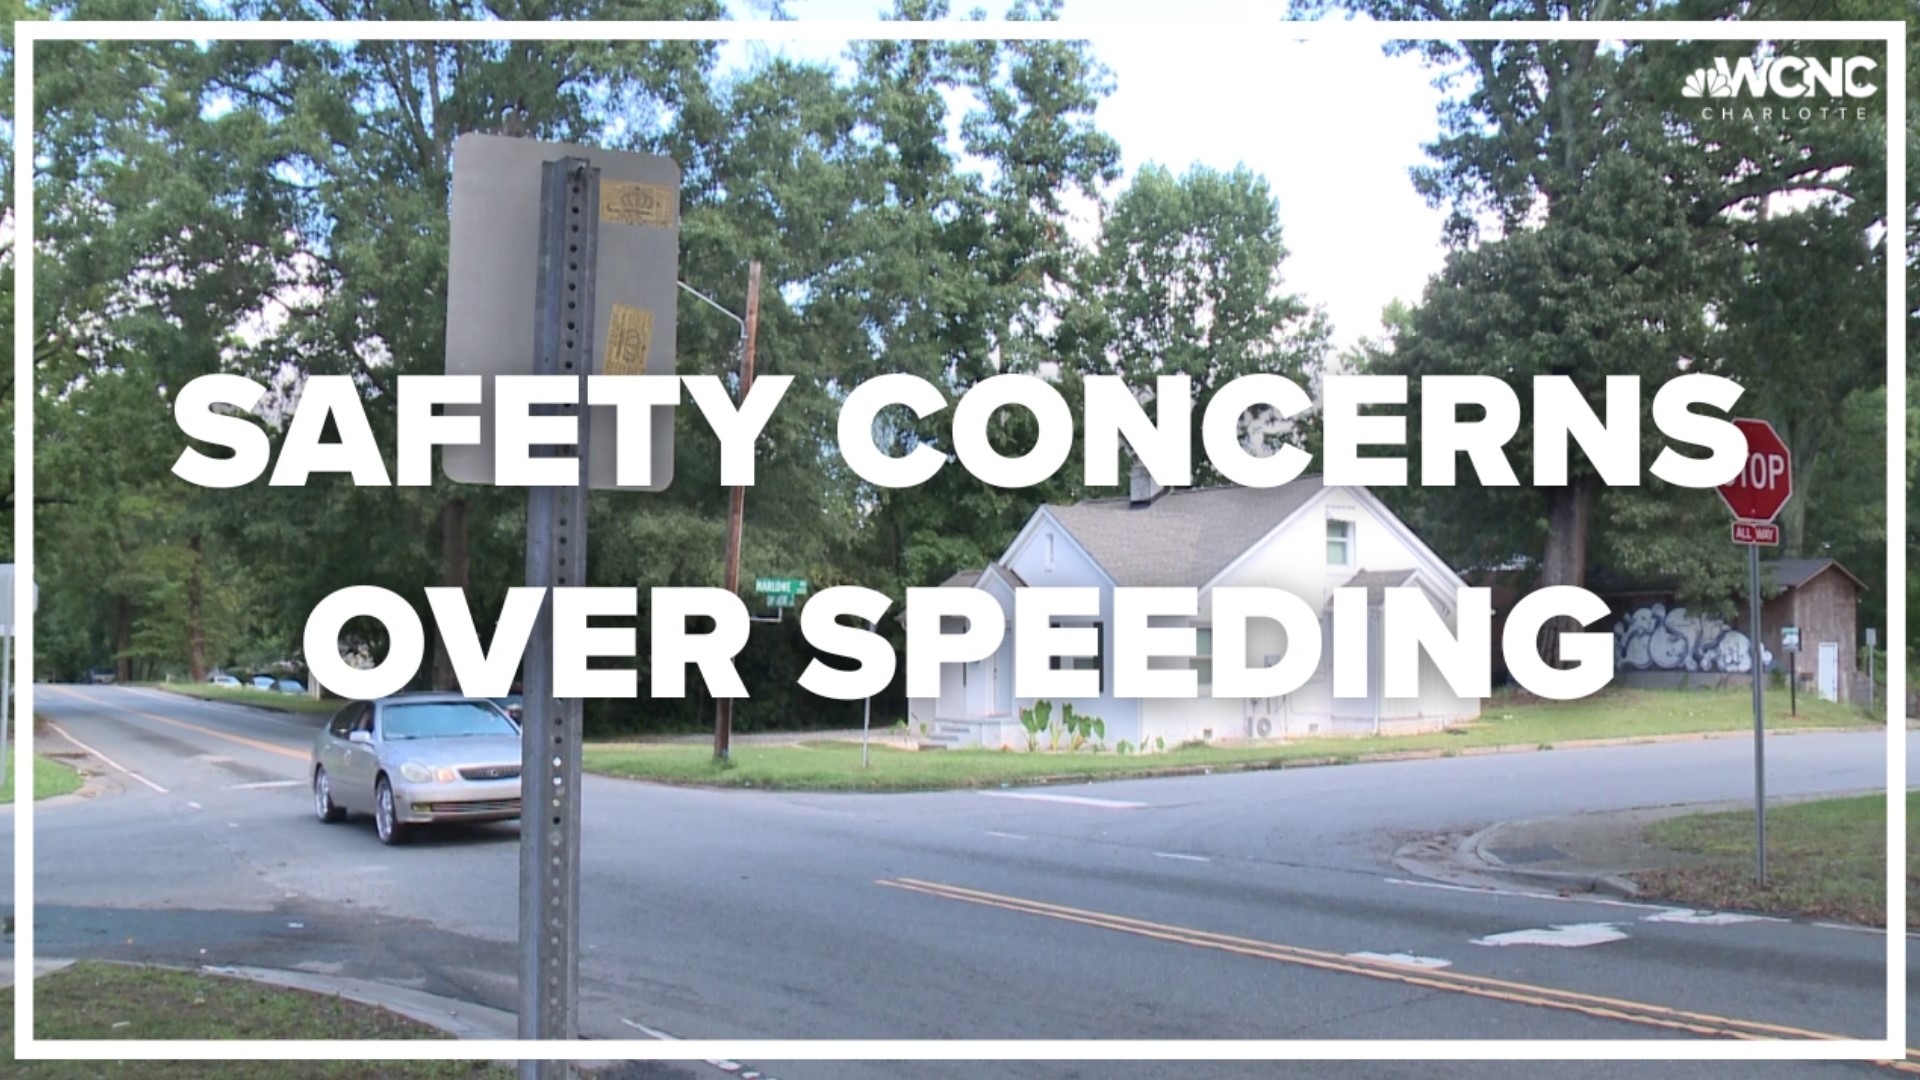 Residents in the neighborhood are expressing safety concerns over speeding drivers in the area.